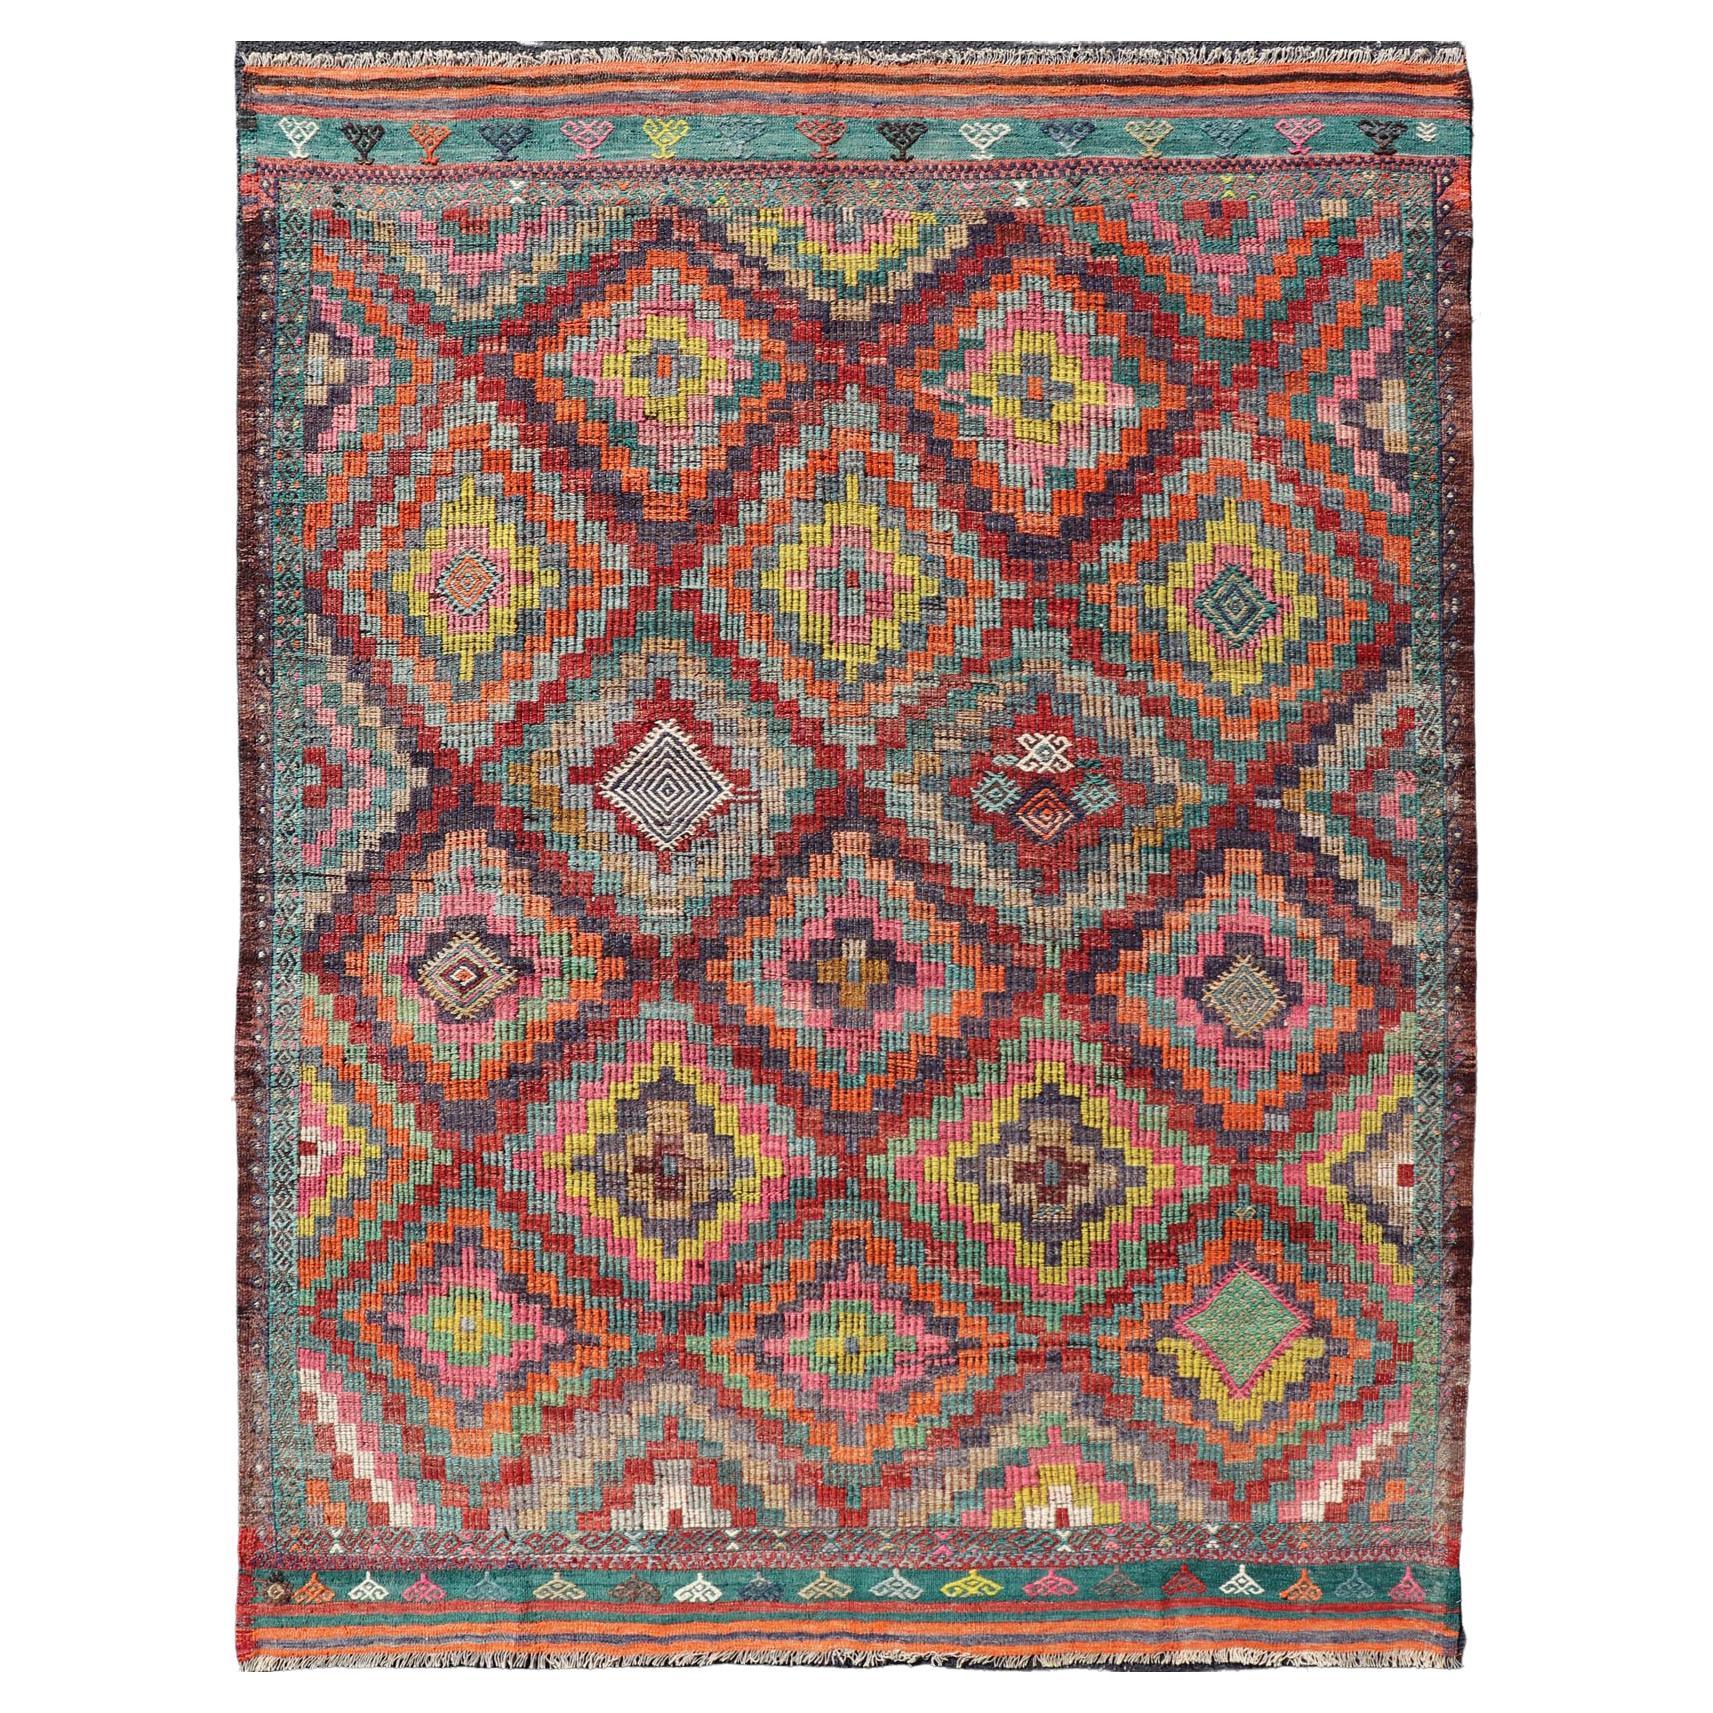 Colorful Vintage Turkish Flat-Weave Tribal Modern Kilim with Embroideries